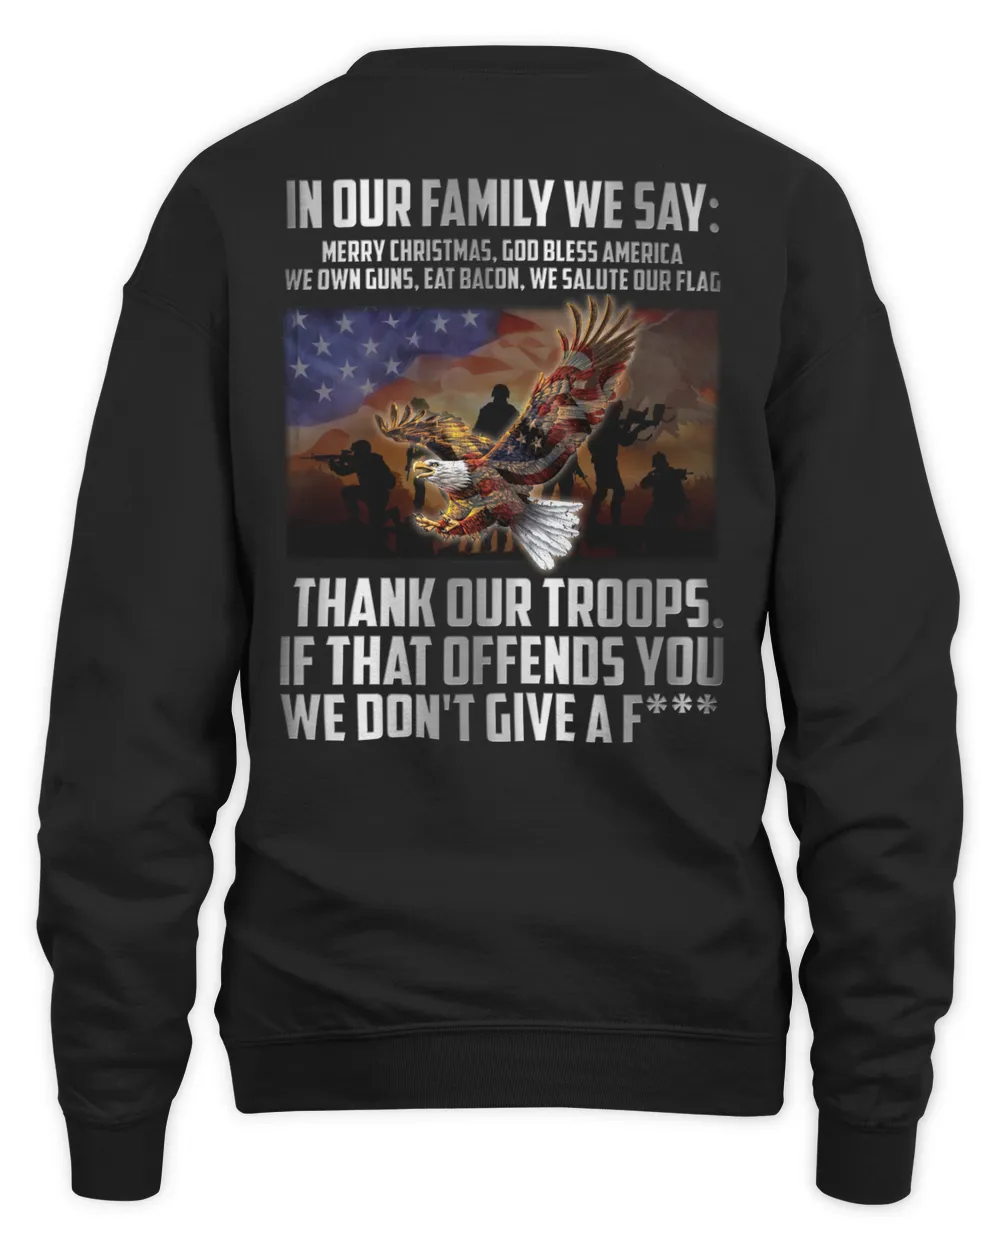 IN OUR FAMILY WE SAY: MERRY CHRISTMAS, GOD BLESS AMERICA WE OWN GUNS, EAT BACON, WE SALUTE OUR FLAG THANK OUR TROOPS. IF THAT OFFENDS YOU WE DON'T GIVE A F***